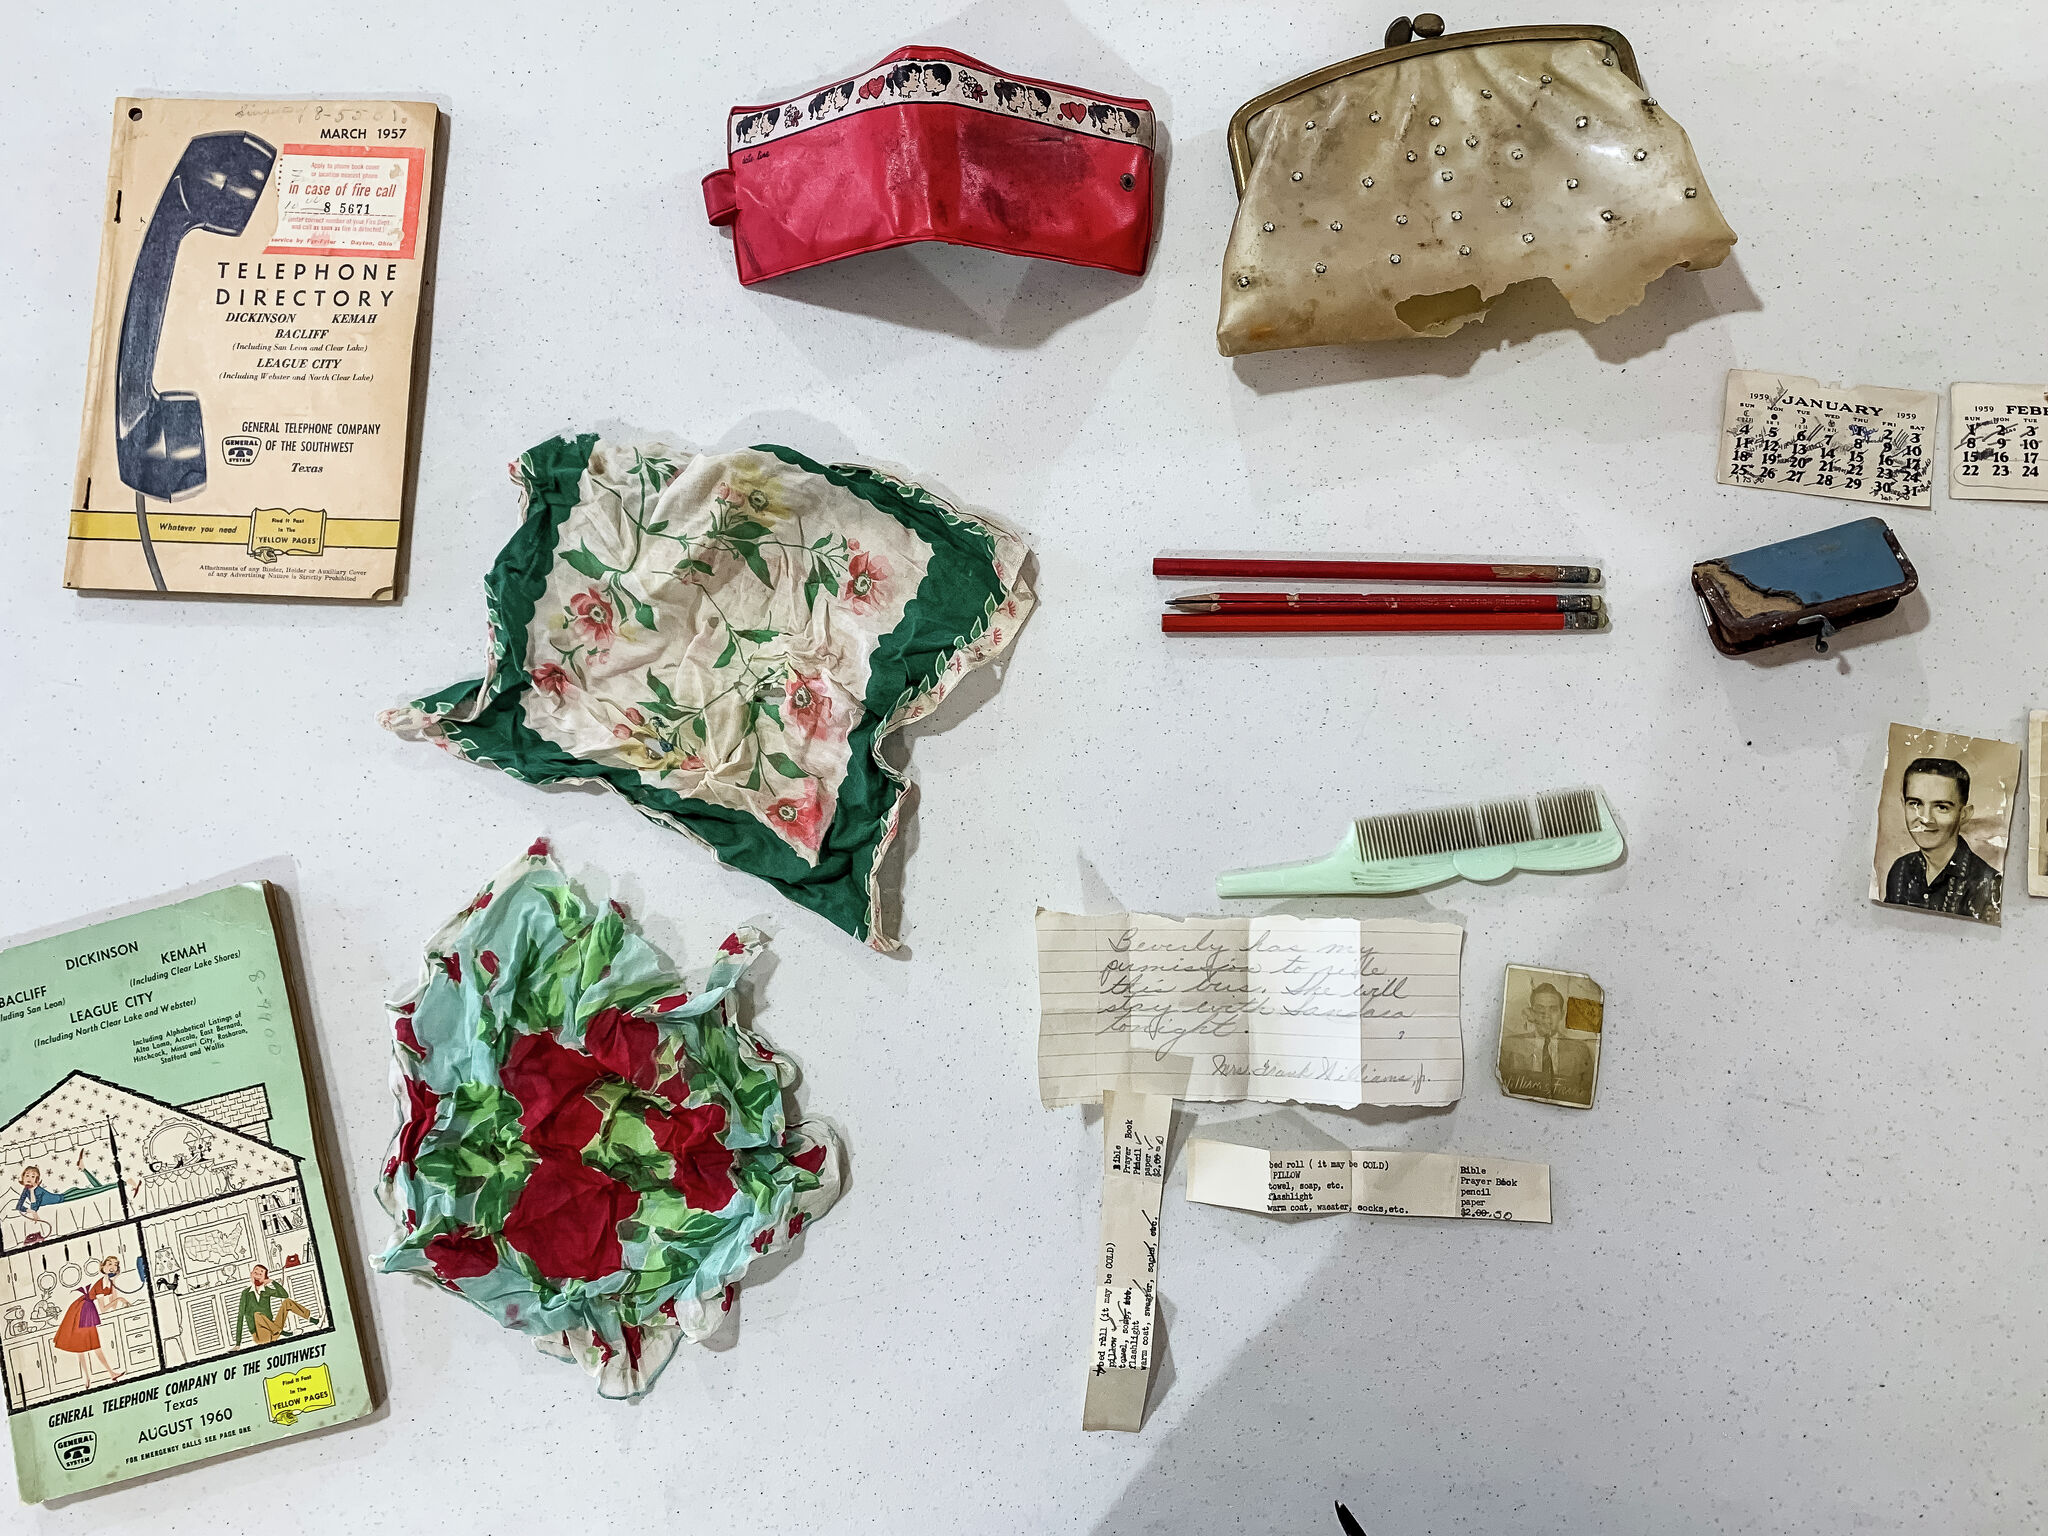 Purse from the 1950s found inside walls of former Texas school